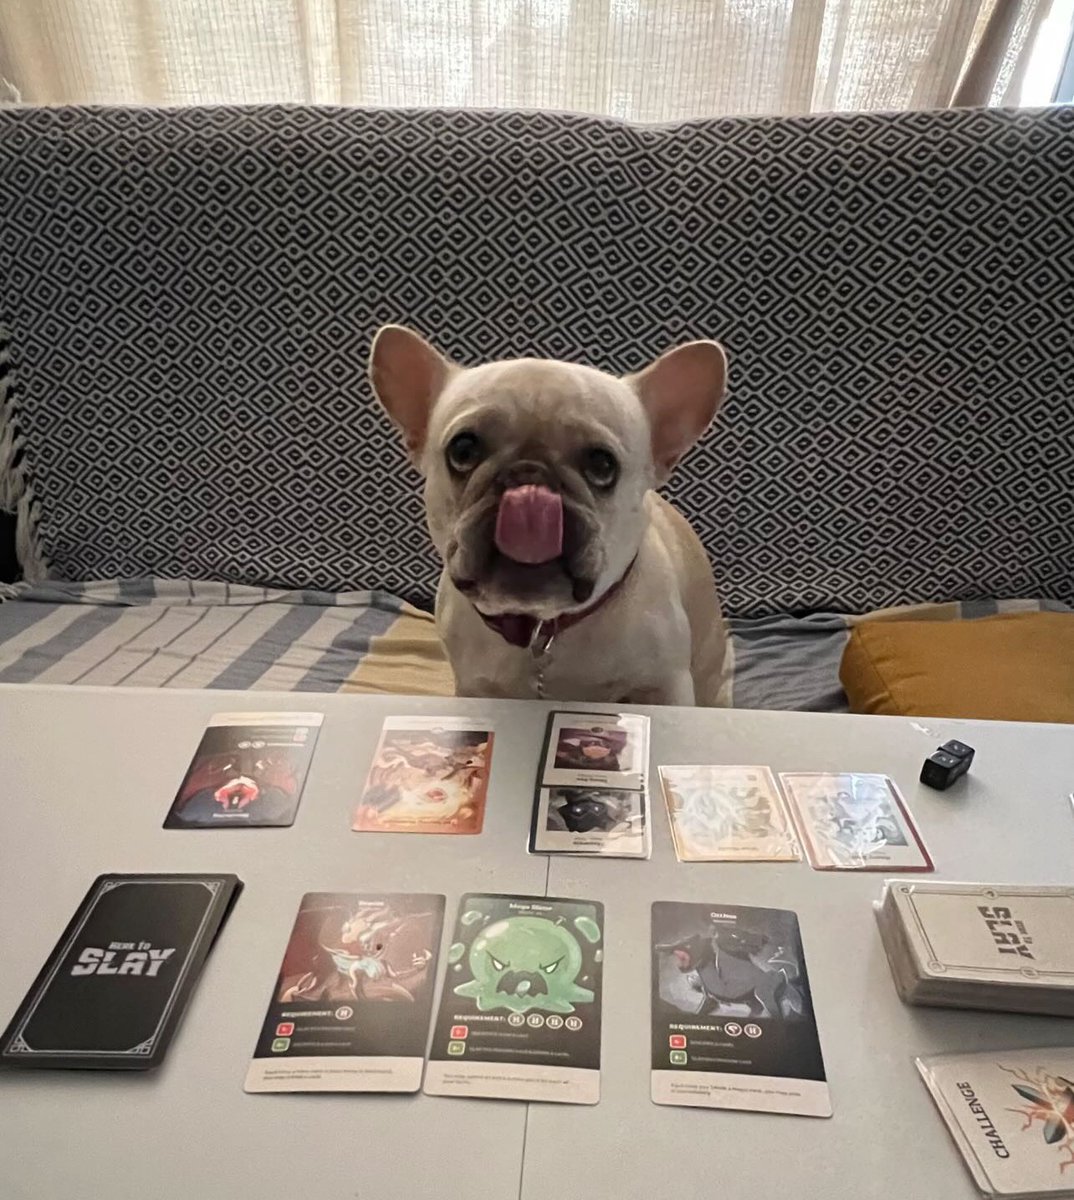 We all know who won 🐶
📸: @adrian9504
🎲: Here To Slay

unstablegames.com/collections/he…
____________________
#unstablegames #heretoslay #boardgamegeek #bgg #tabletopgames #gamenight #boardgames #dogs #cute